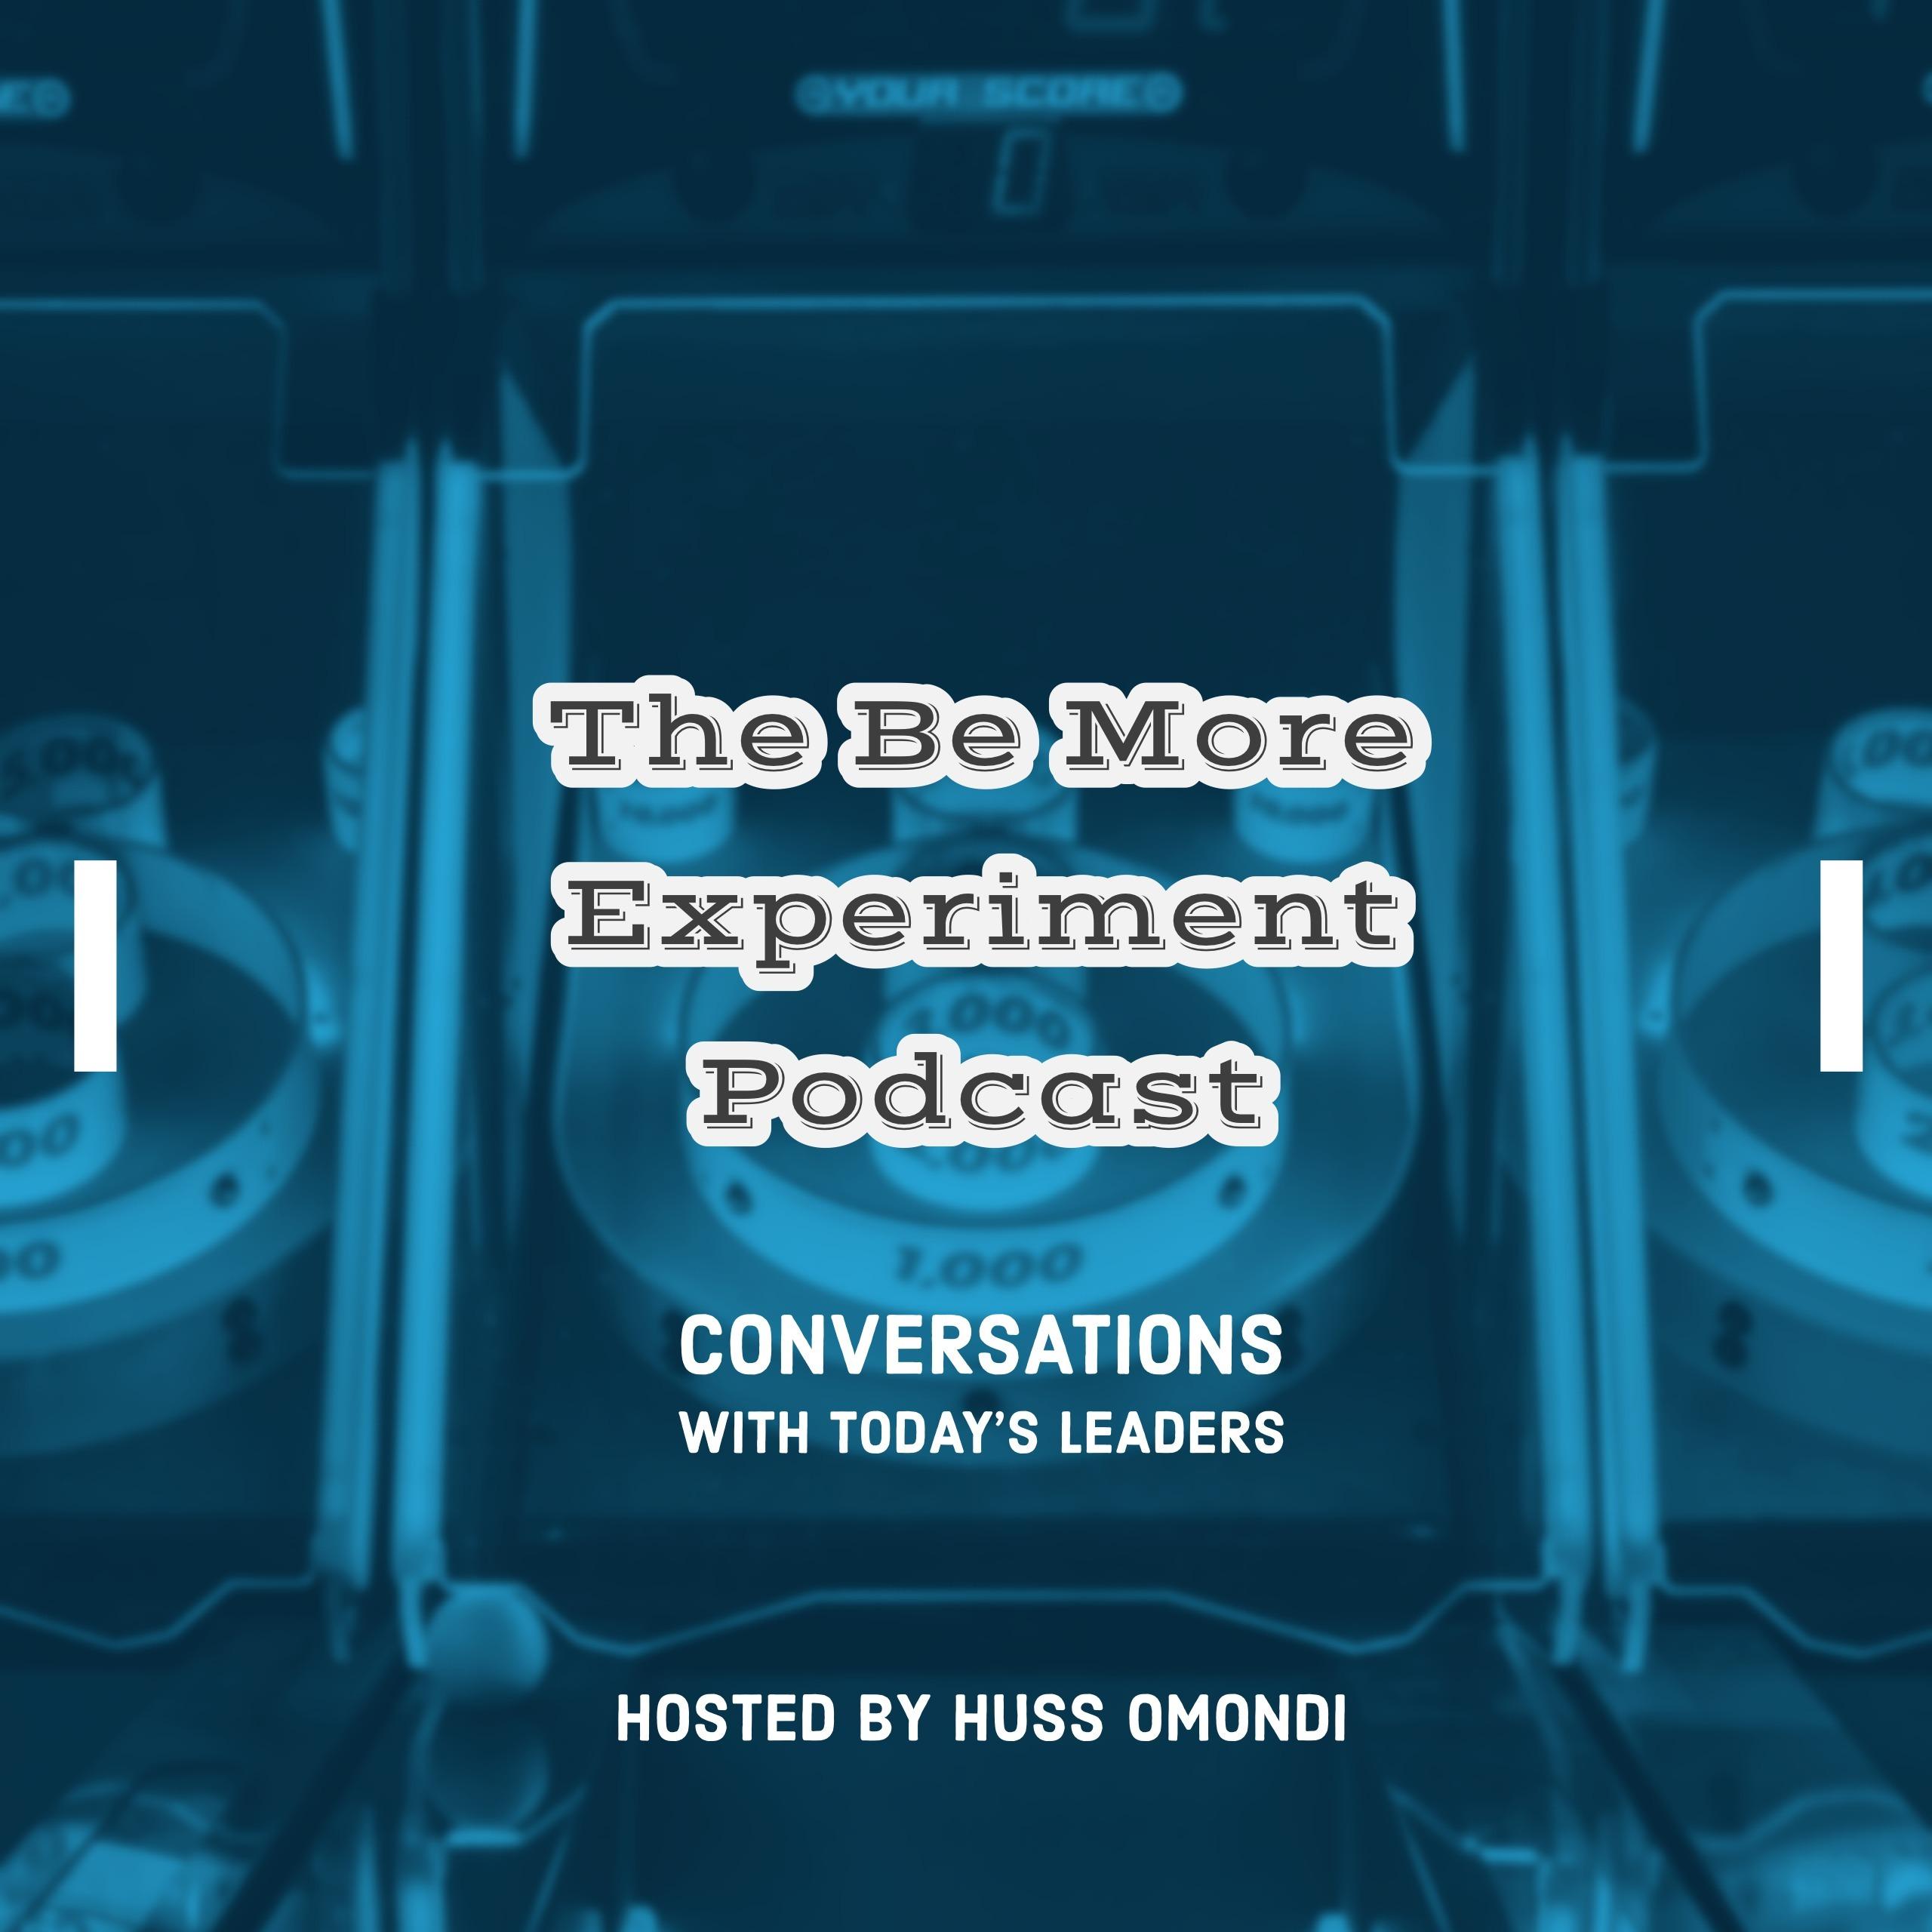 The Be More Experiment Podcast